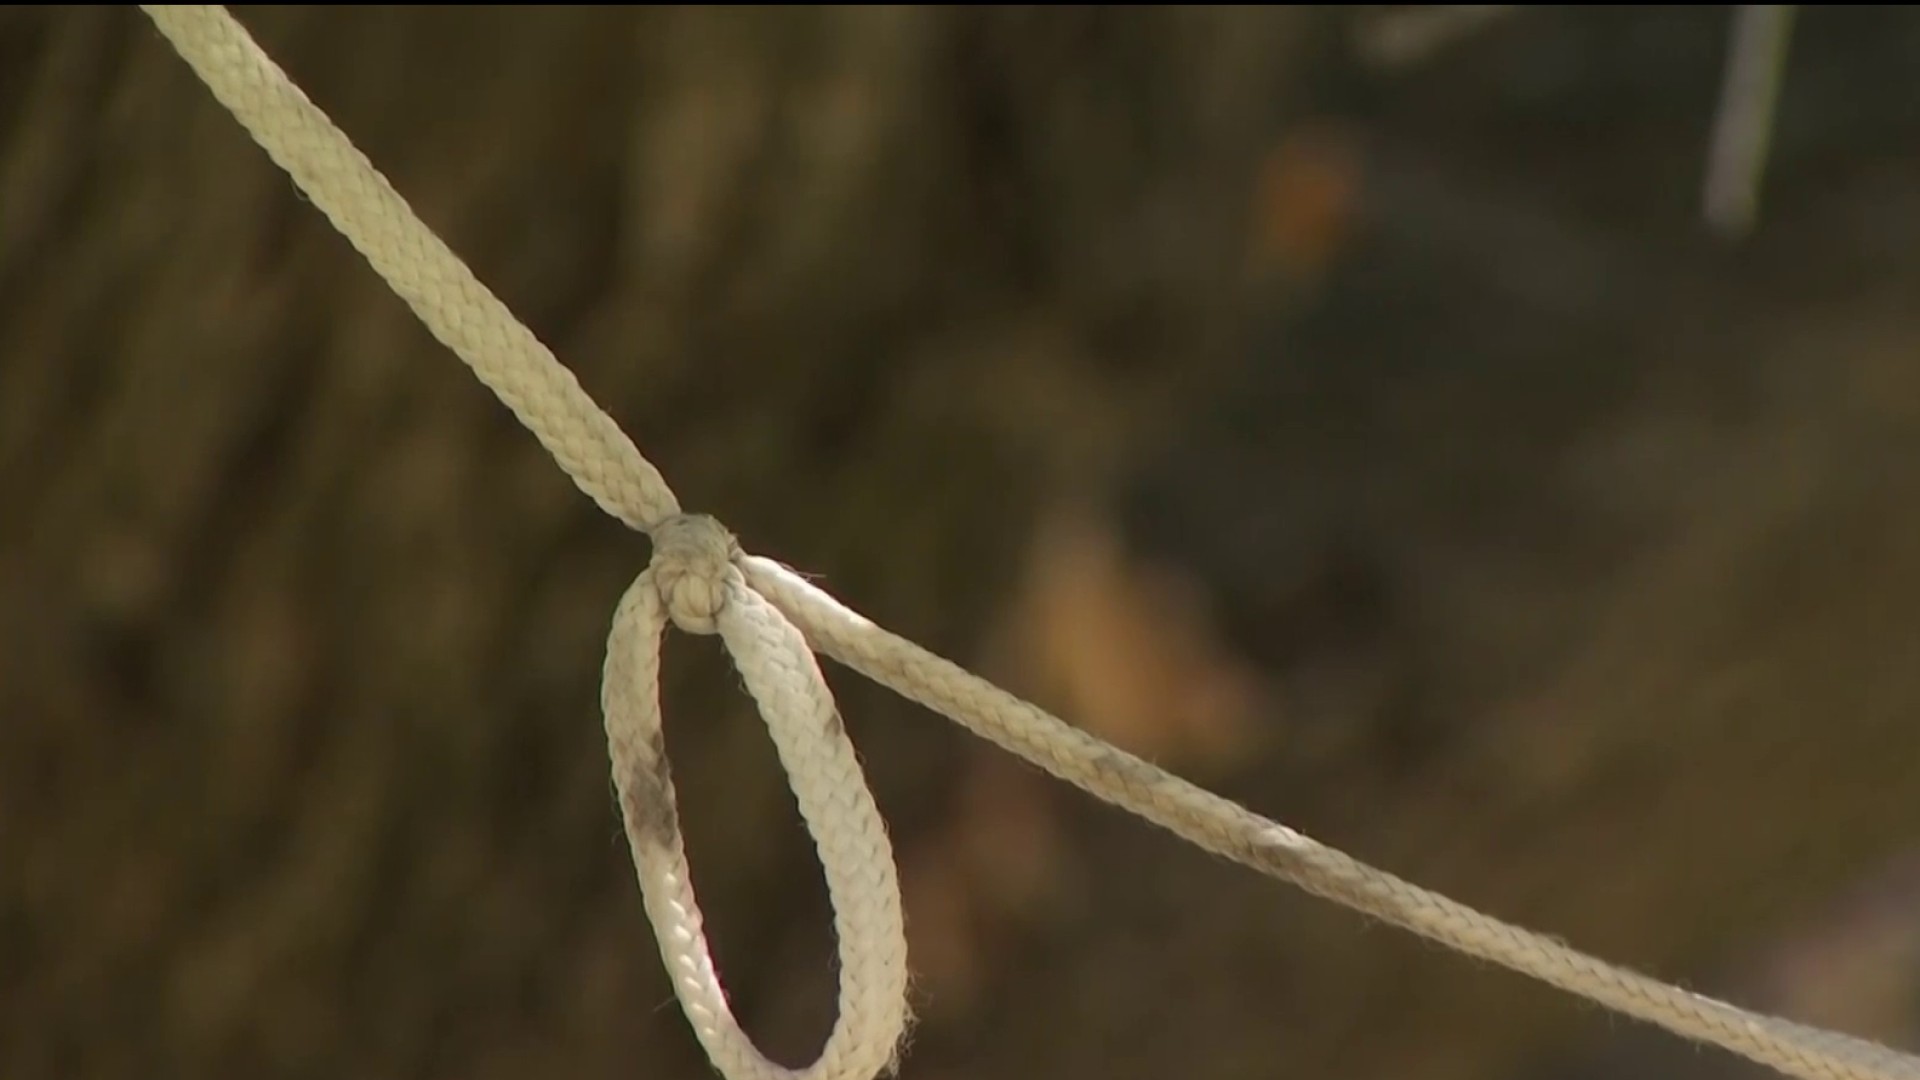 Nooses' in Oakland park were exercise aids, man says